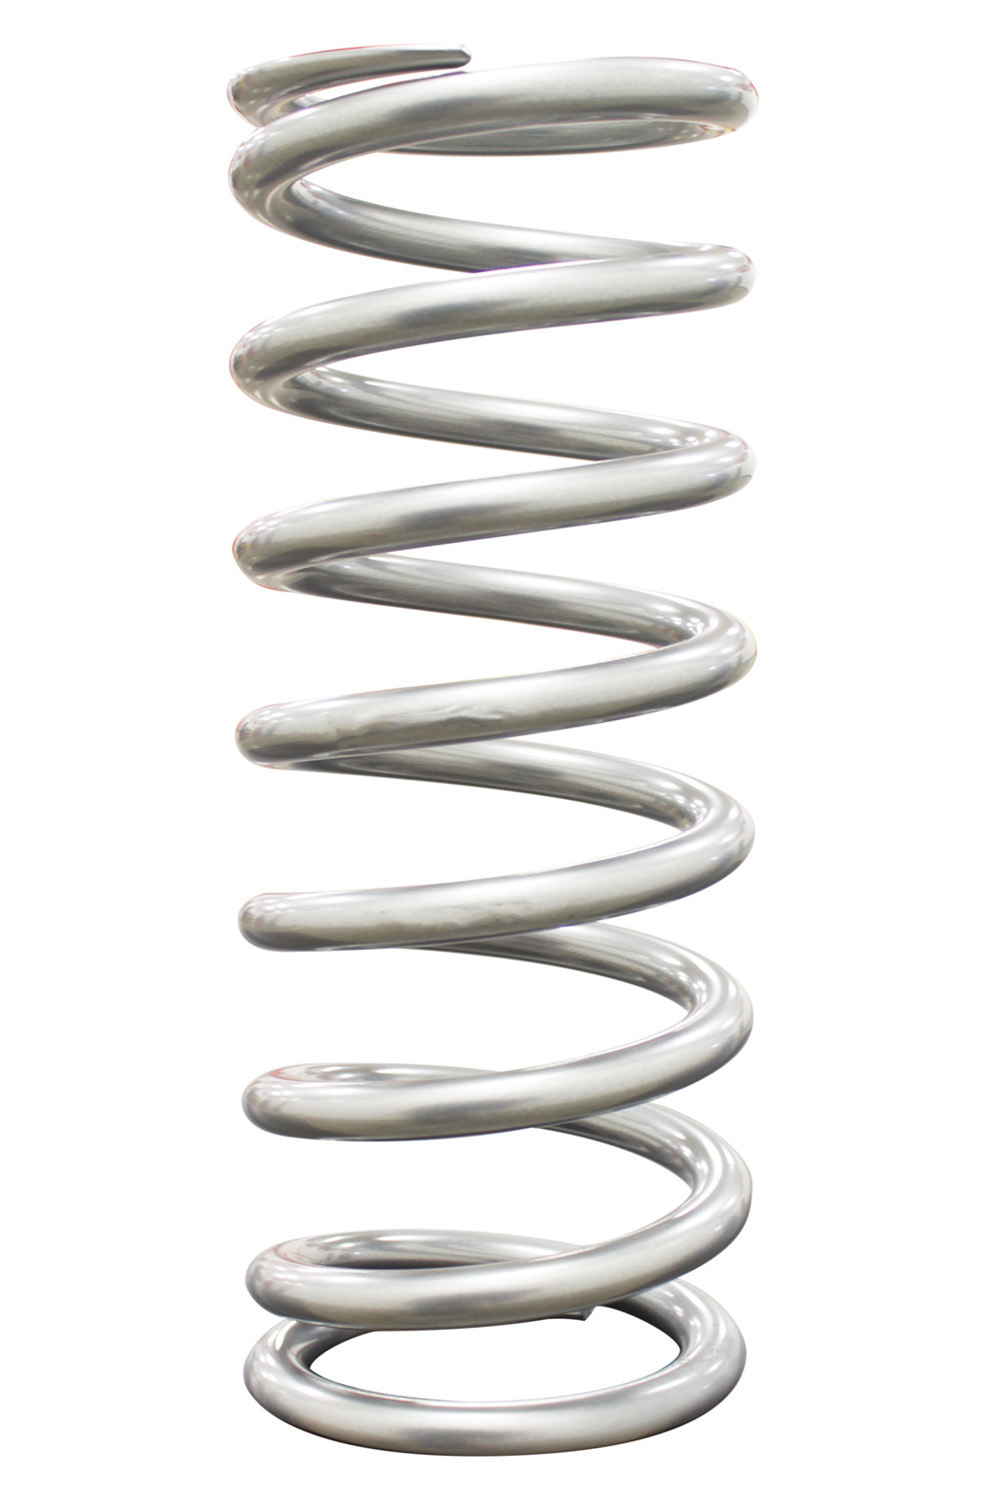 QA1 10HT150 Coil Spring, Coil-Over, 2.500 in ID, 10.000 in Length, 150 lb/in Spring Rate, Steel, Silver Powder Coat, Each